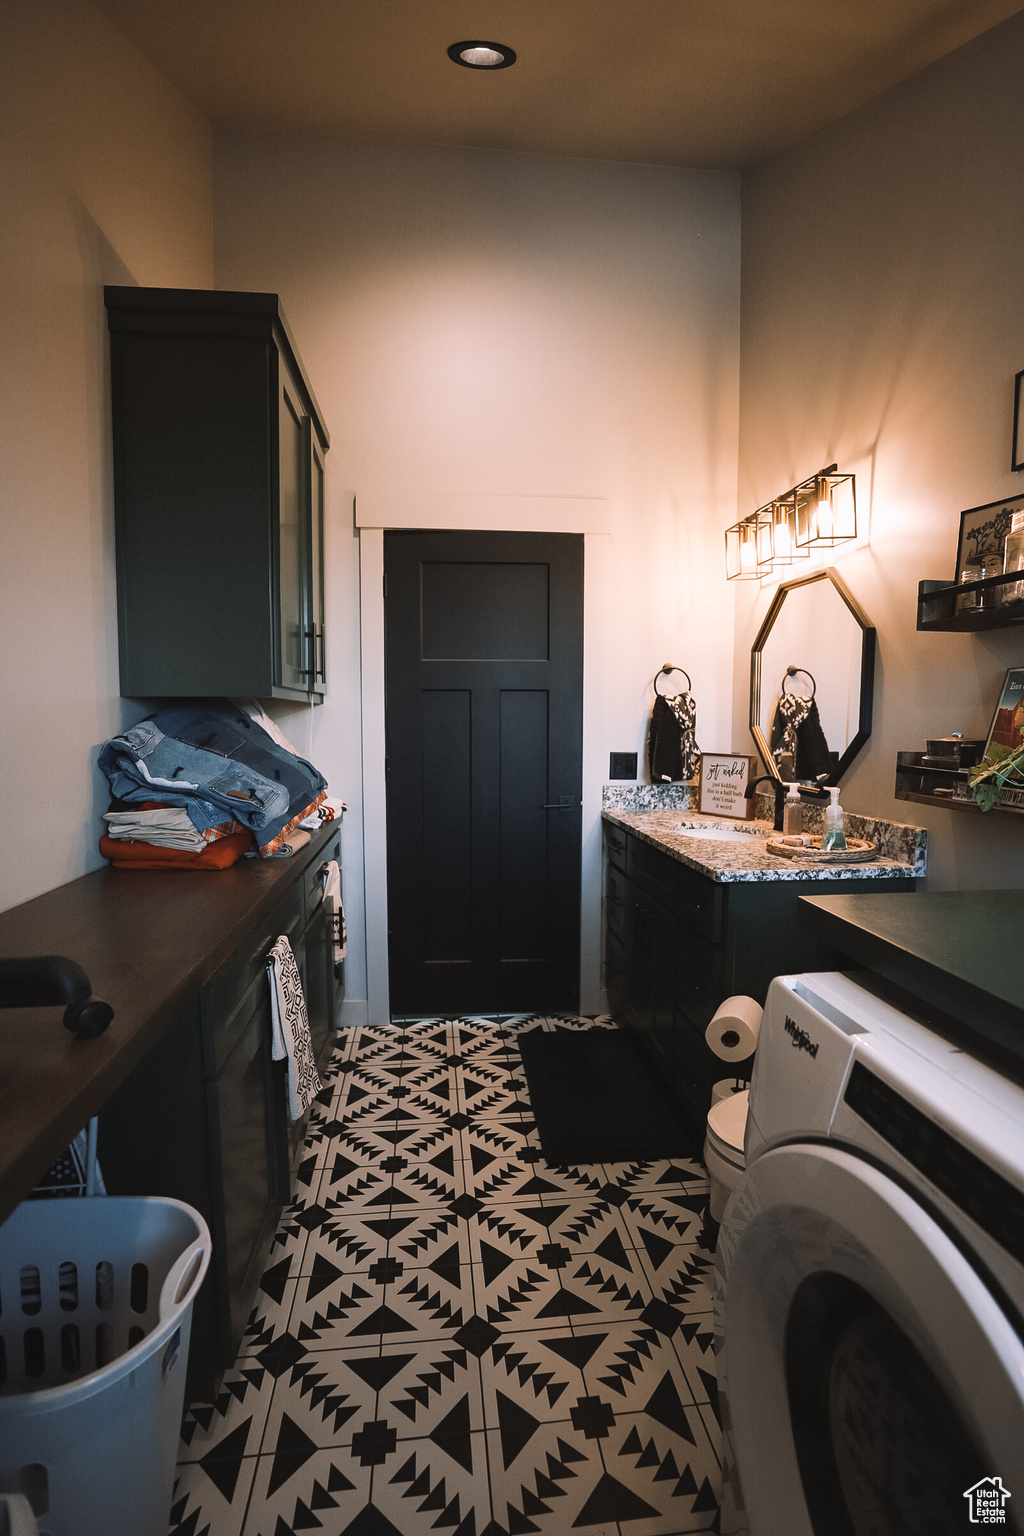 Laundry room/Half Bathroom with a bath to relax in, toilet, vanity, washer / dryer, and tile flooring